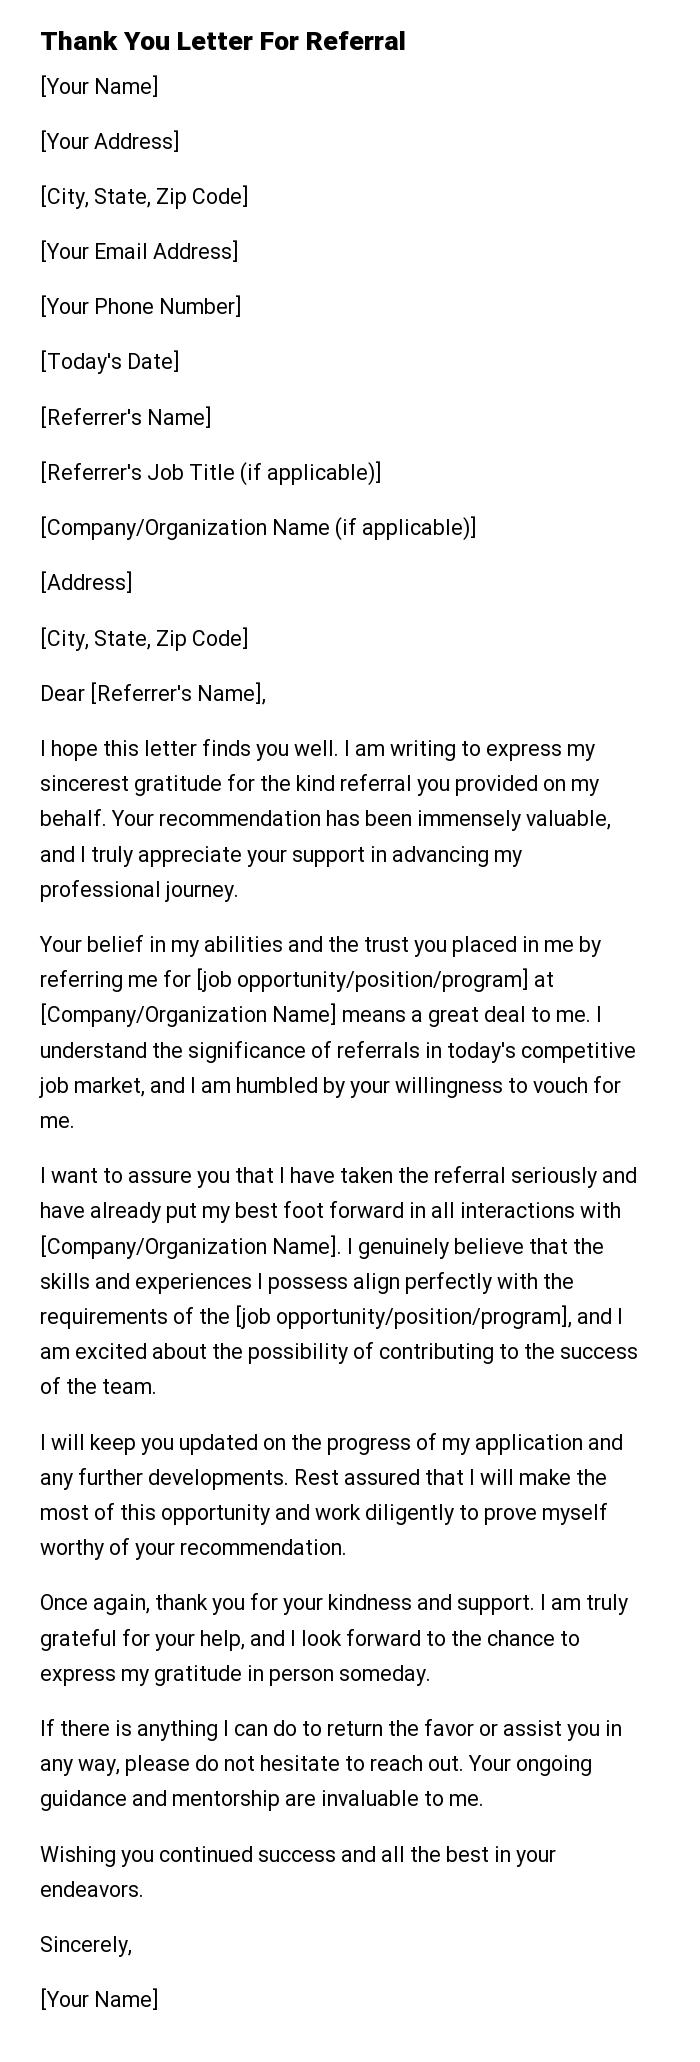 Thank You Letter For Referral